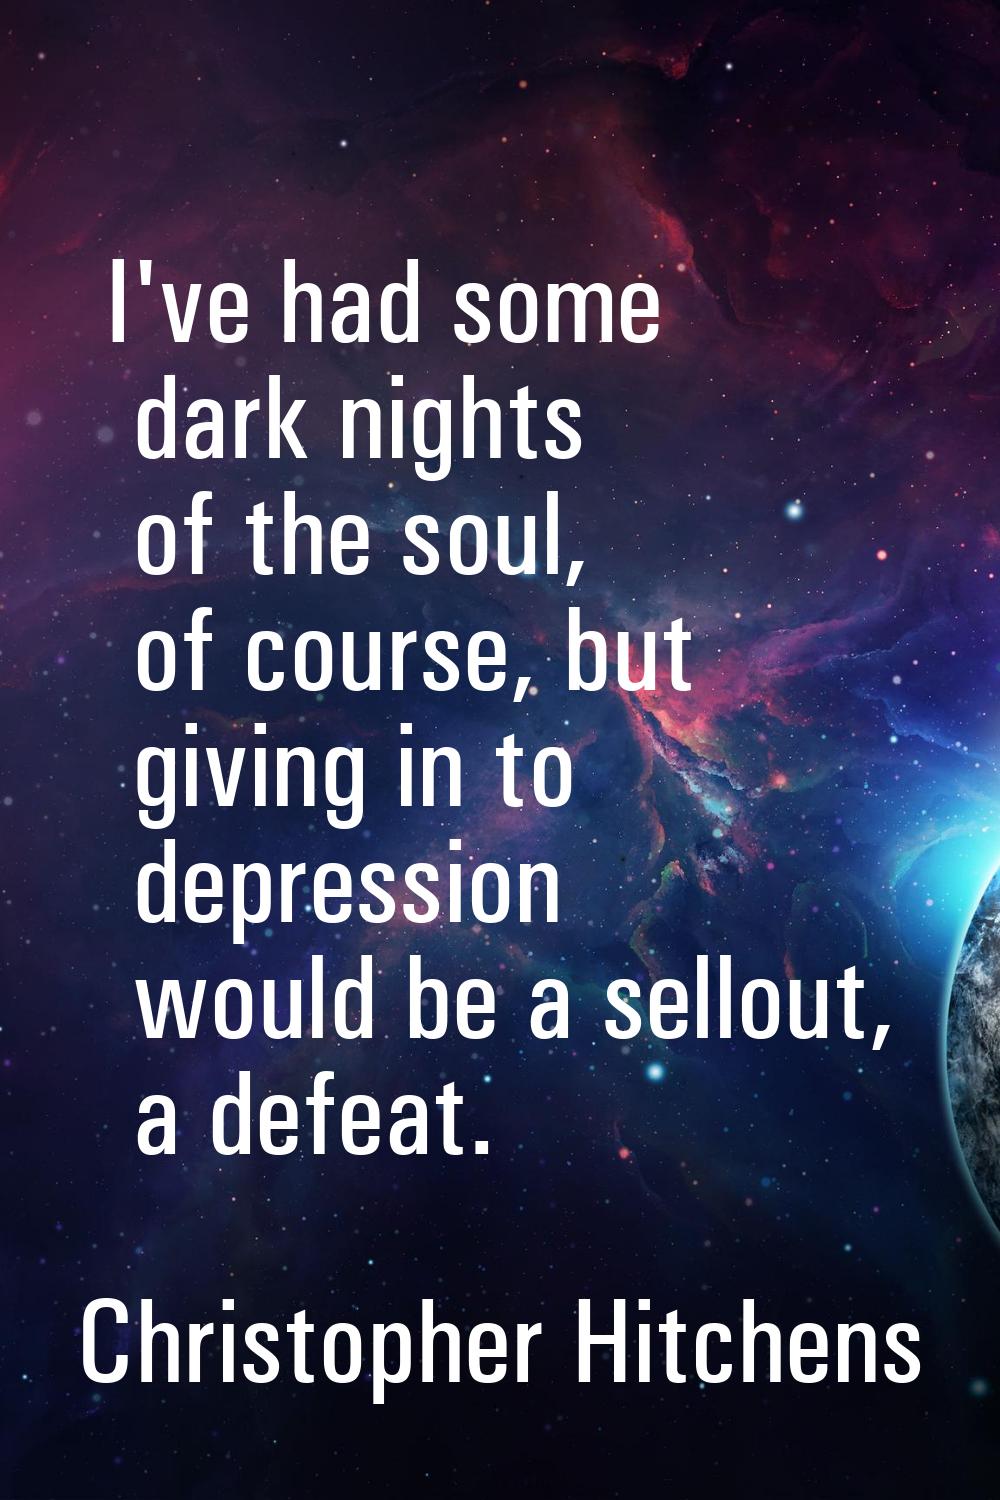 I've had some dark nights of the soul, of course, but giving in to depression would be a sellout, a